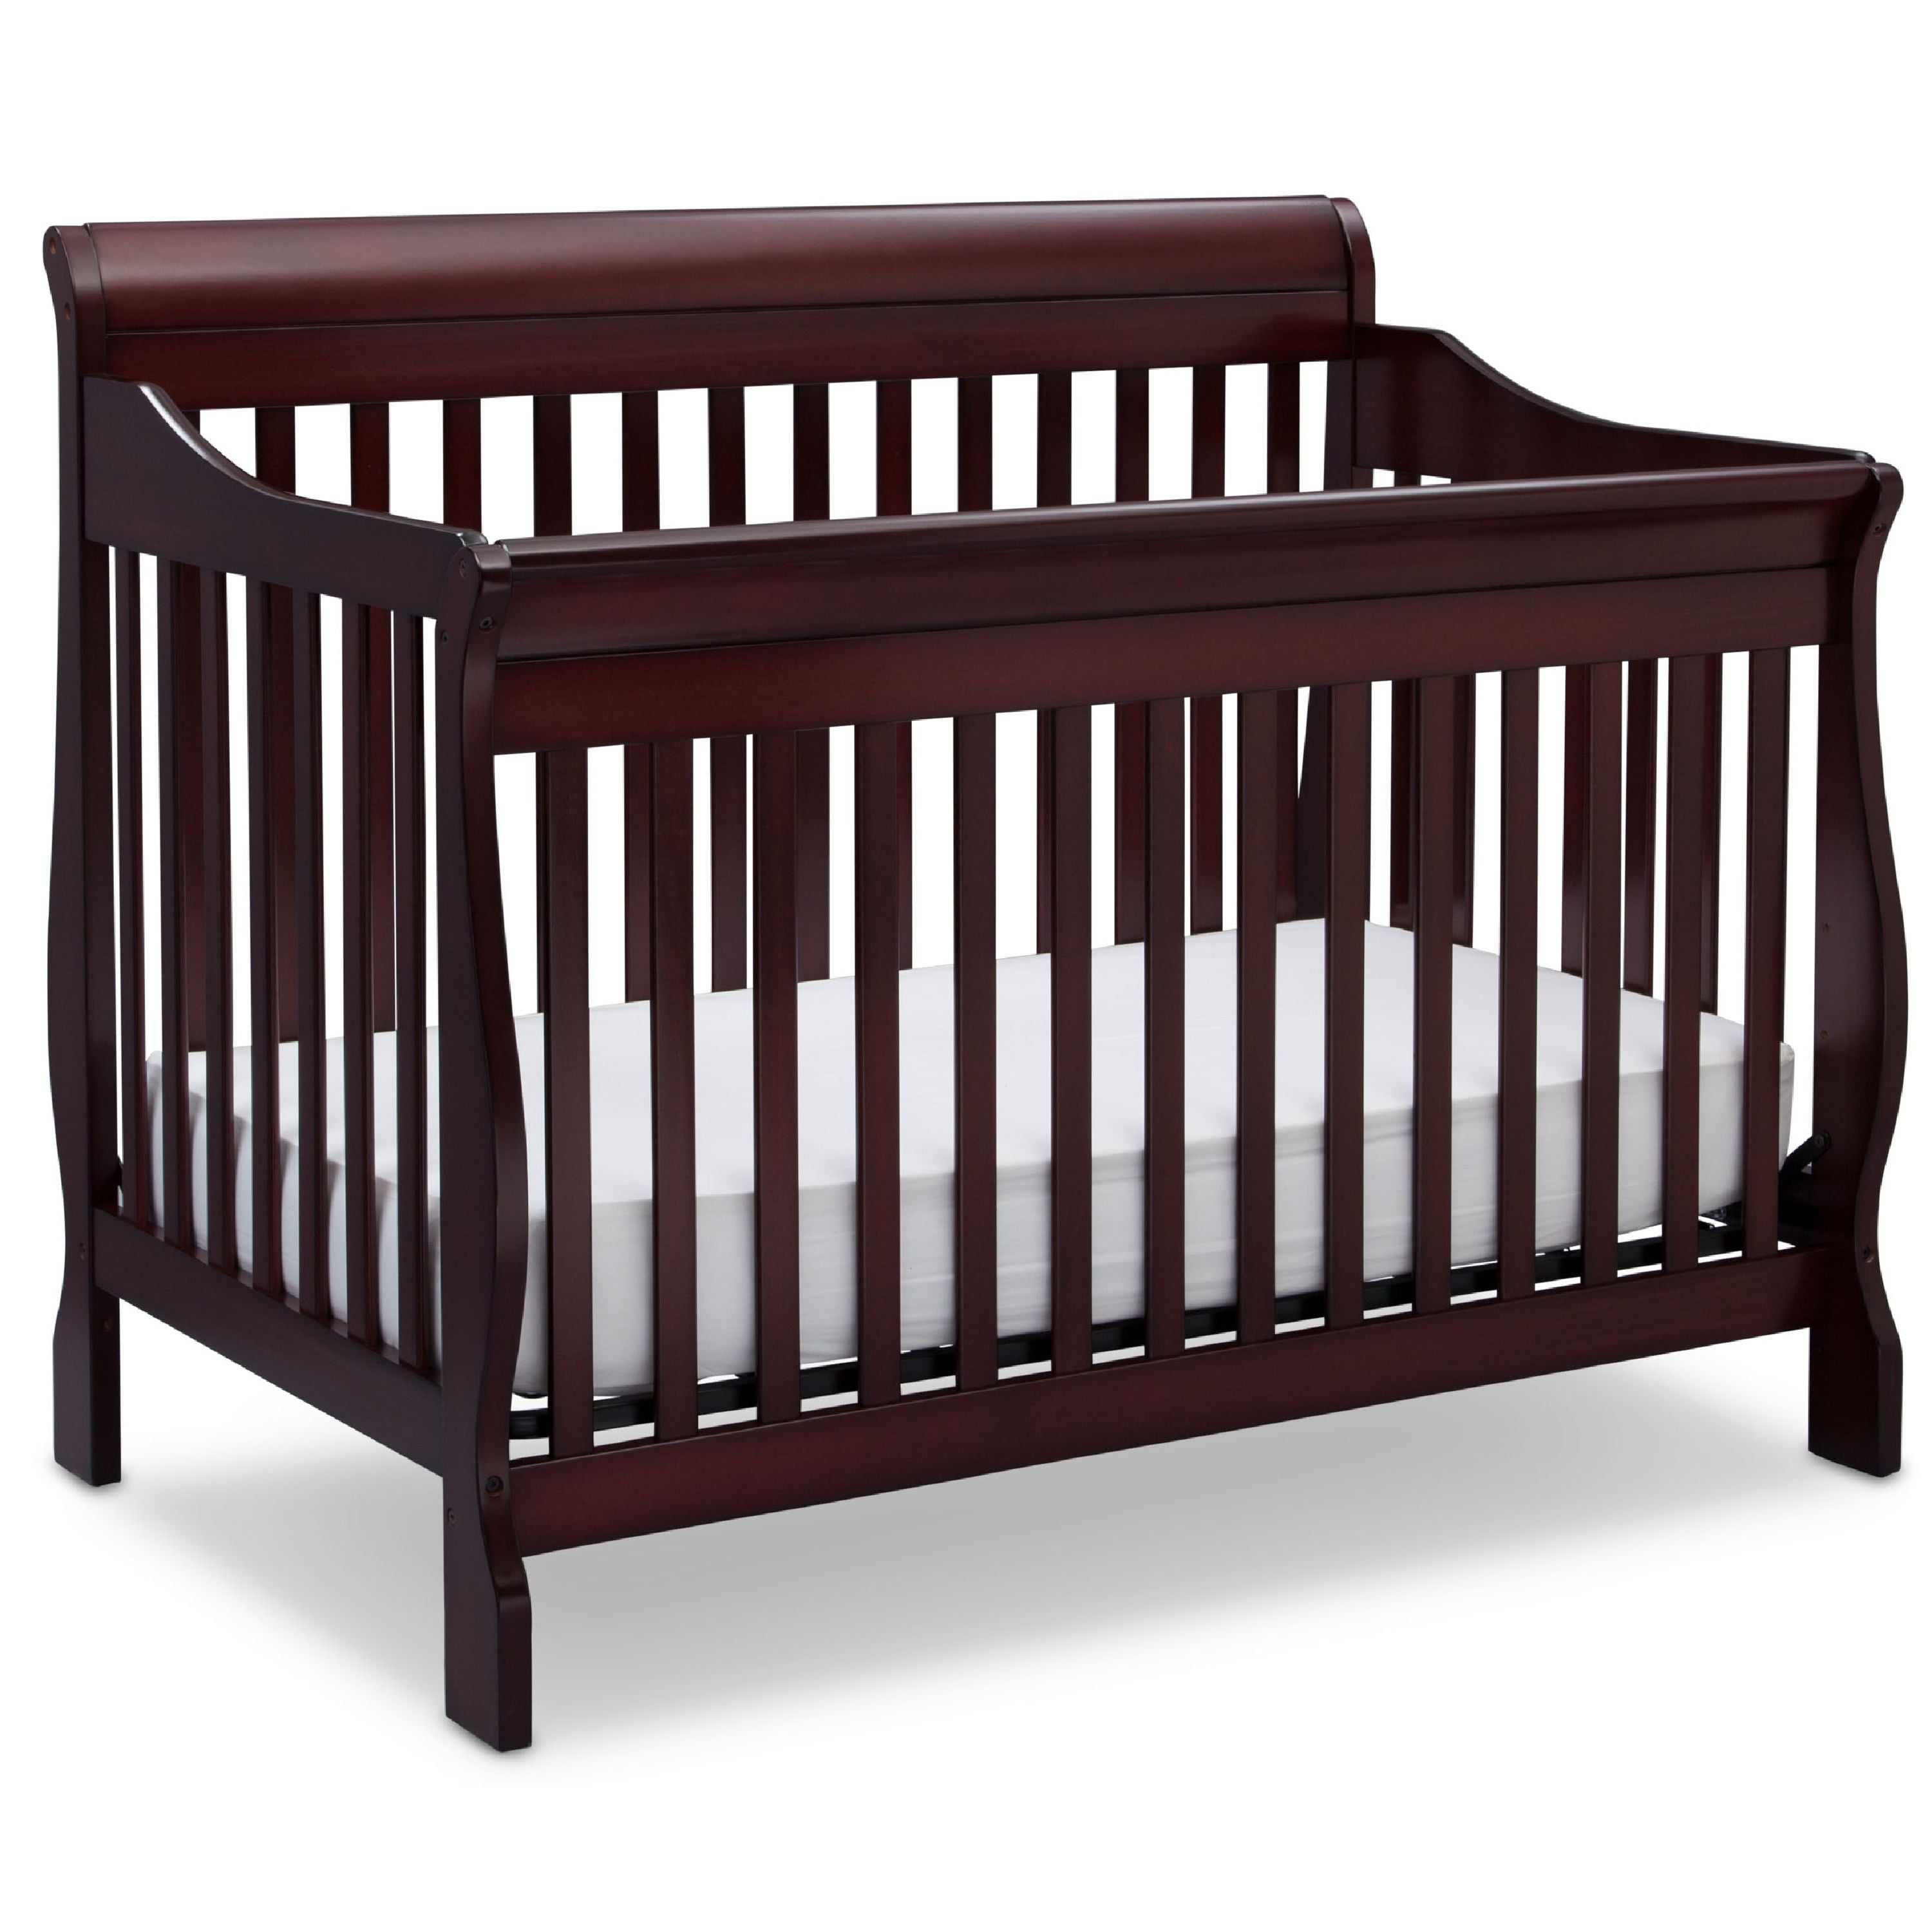 mountain buggy infant insert